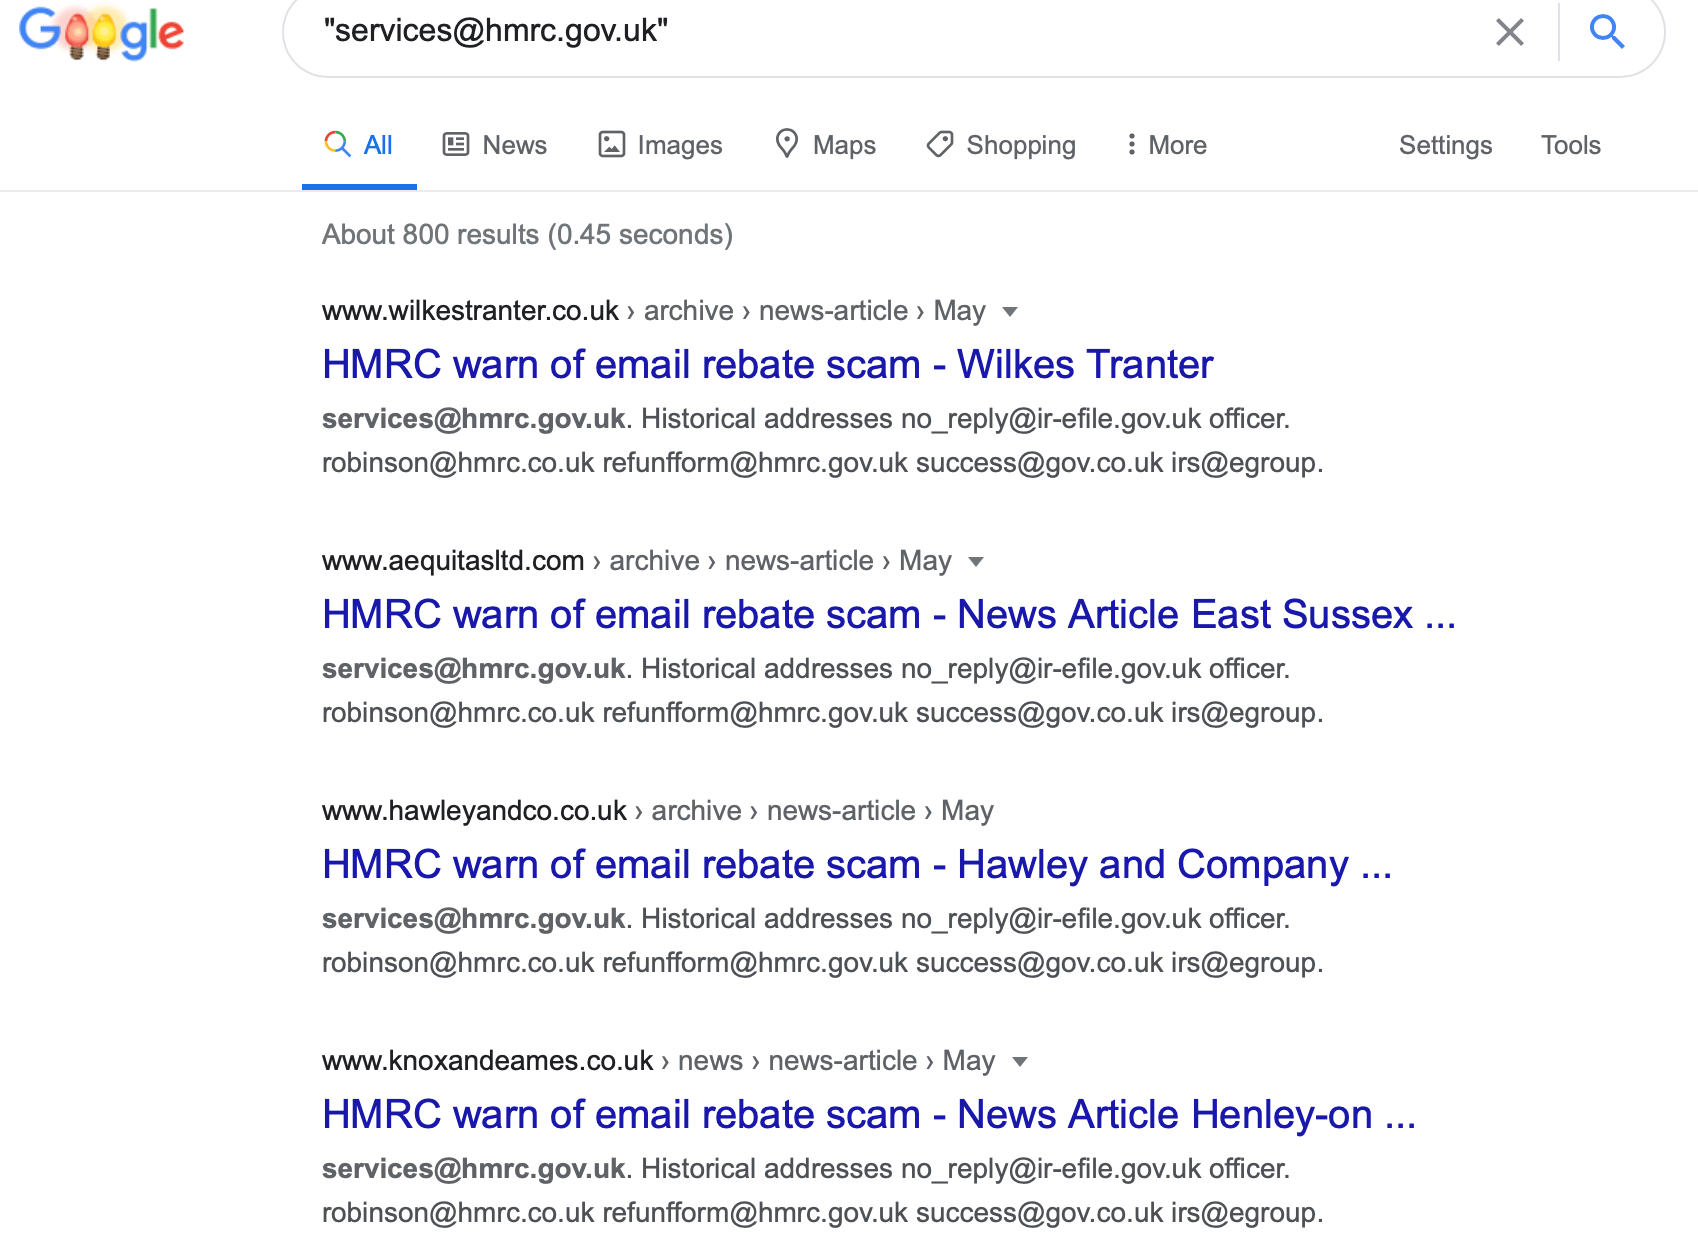 A screenshot of Google Search results showing some of the websites that warn against the email address “services@hmrc[dot]gov[dot]uk.”